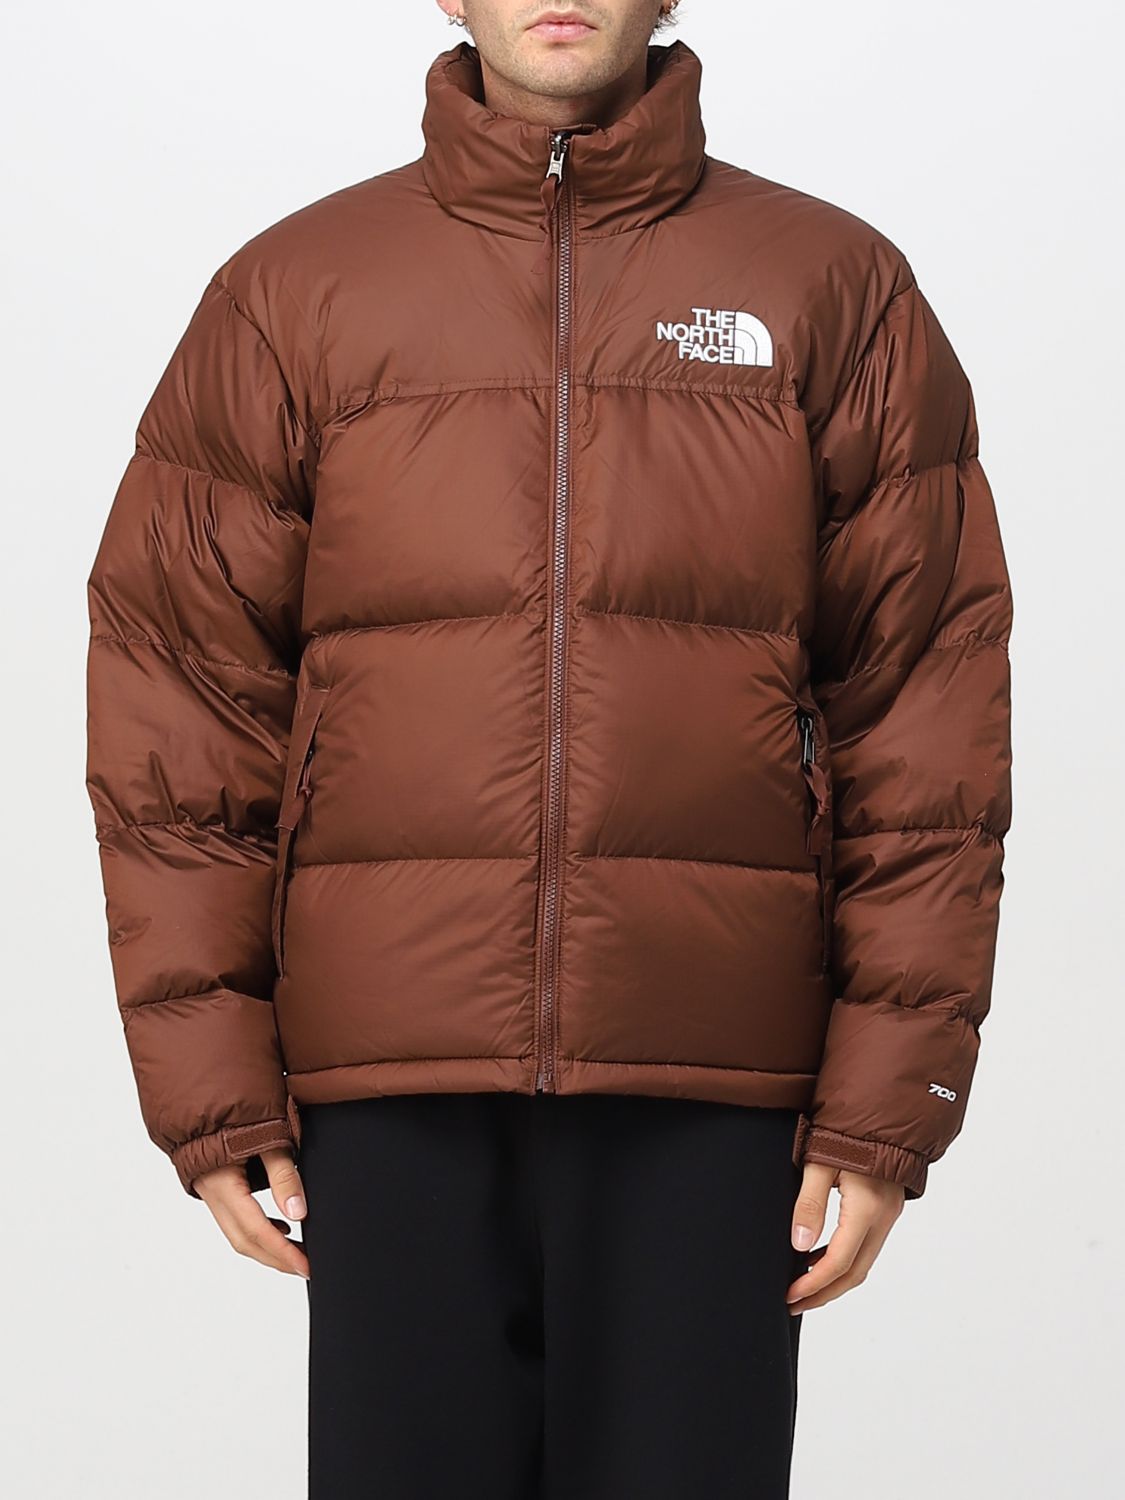 THE jacket for man - Brown | The North Face jacket NF0A3C8D online on GIGLIO.COM